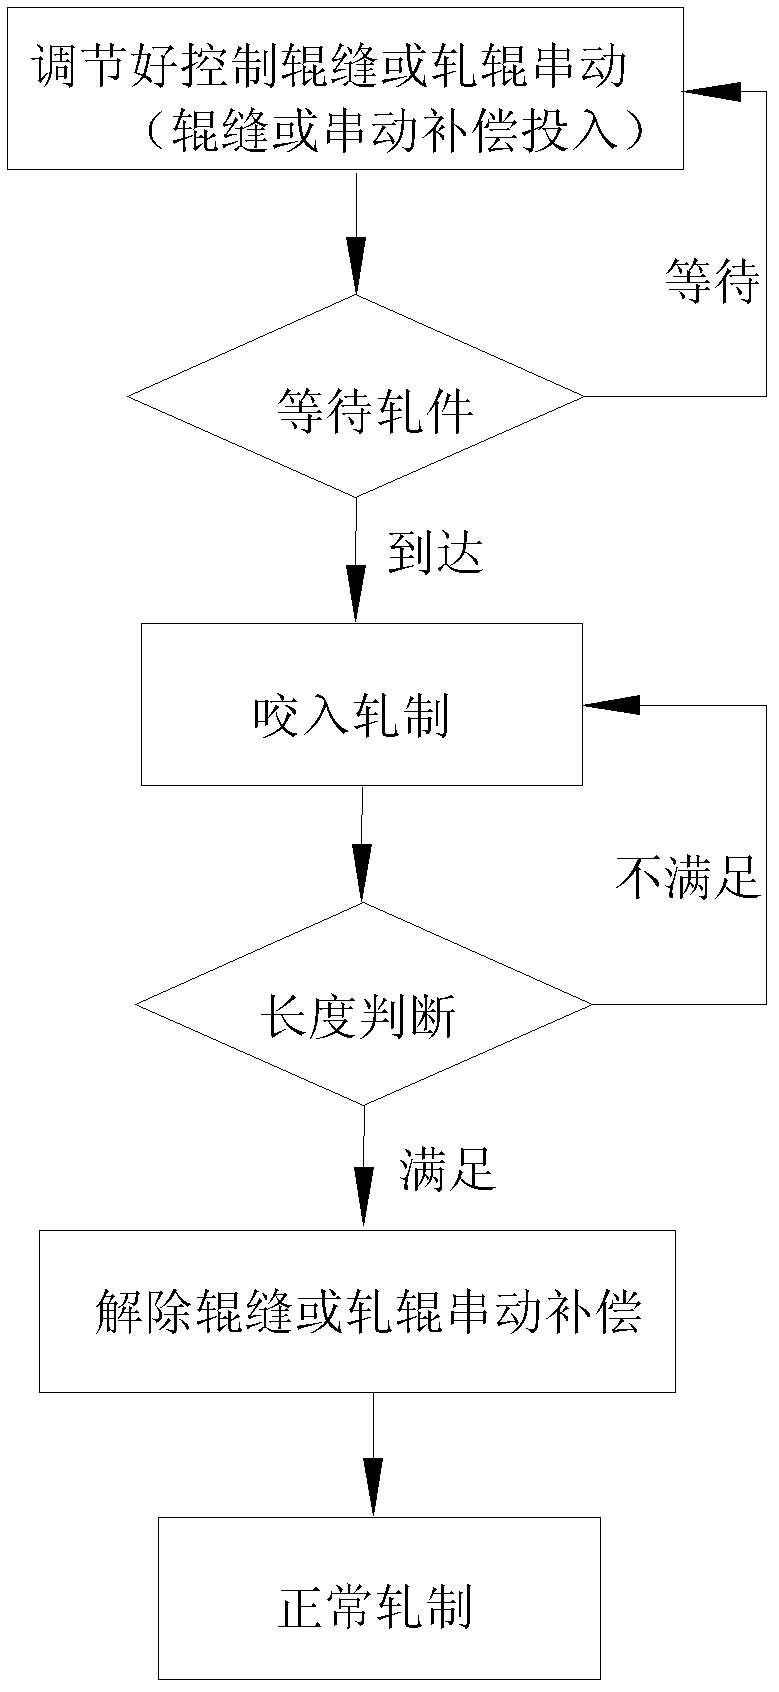 Steel rail cross section specification full-length fluctuation control method